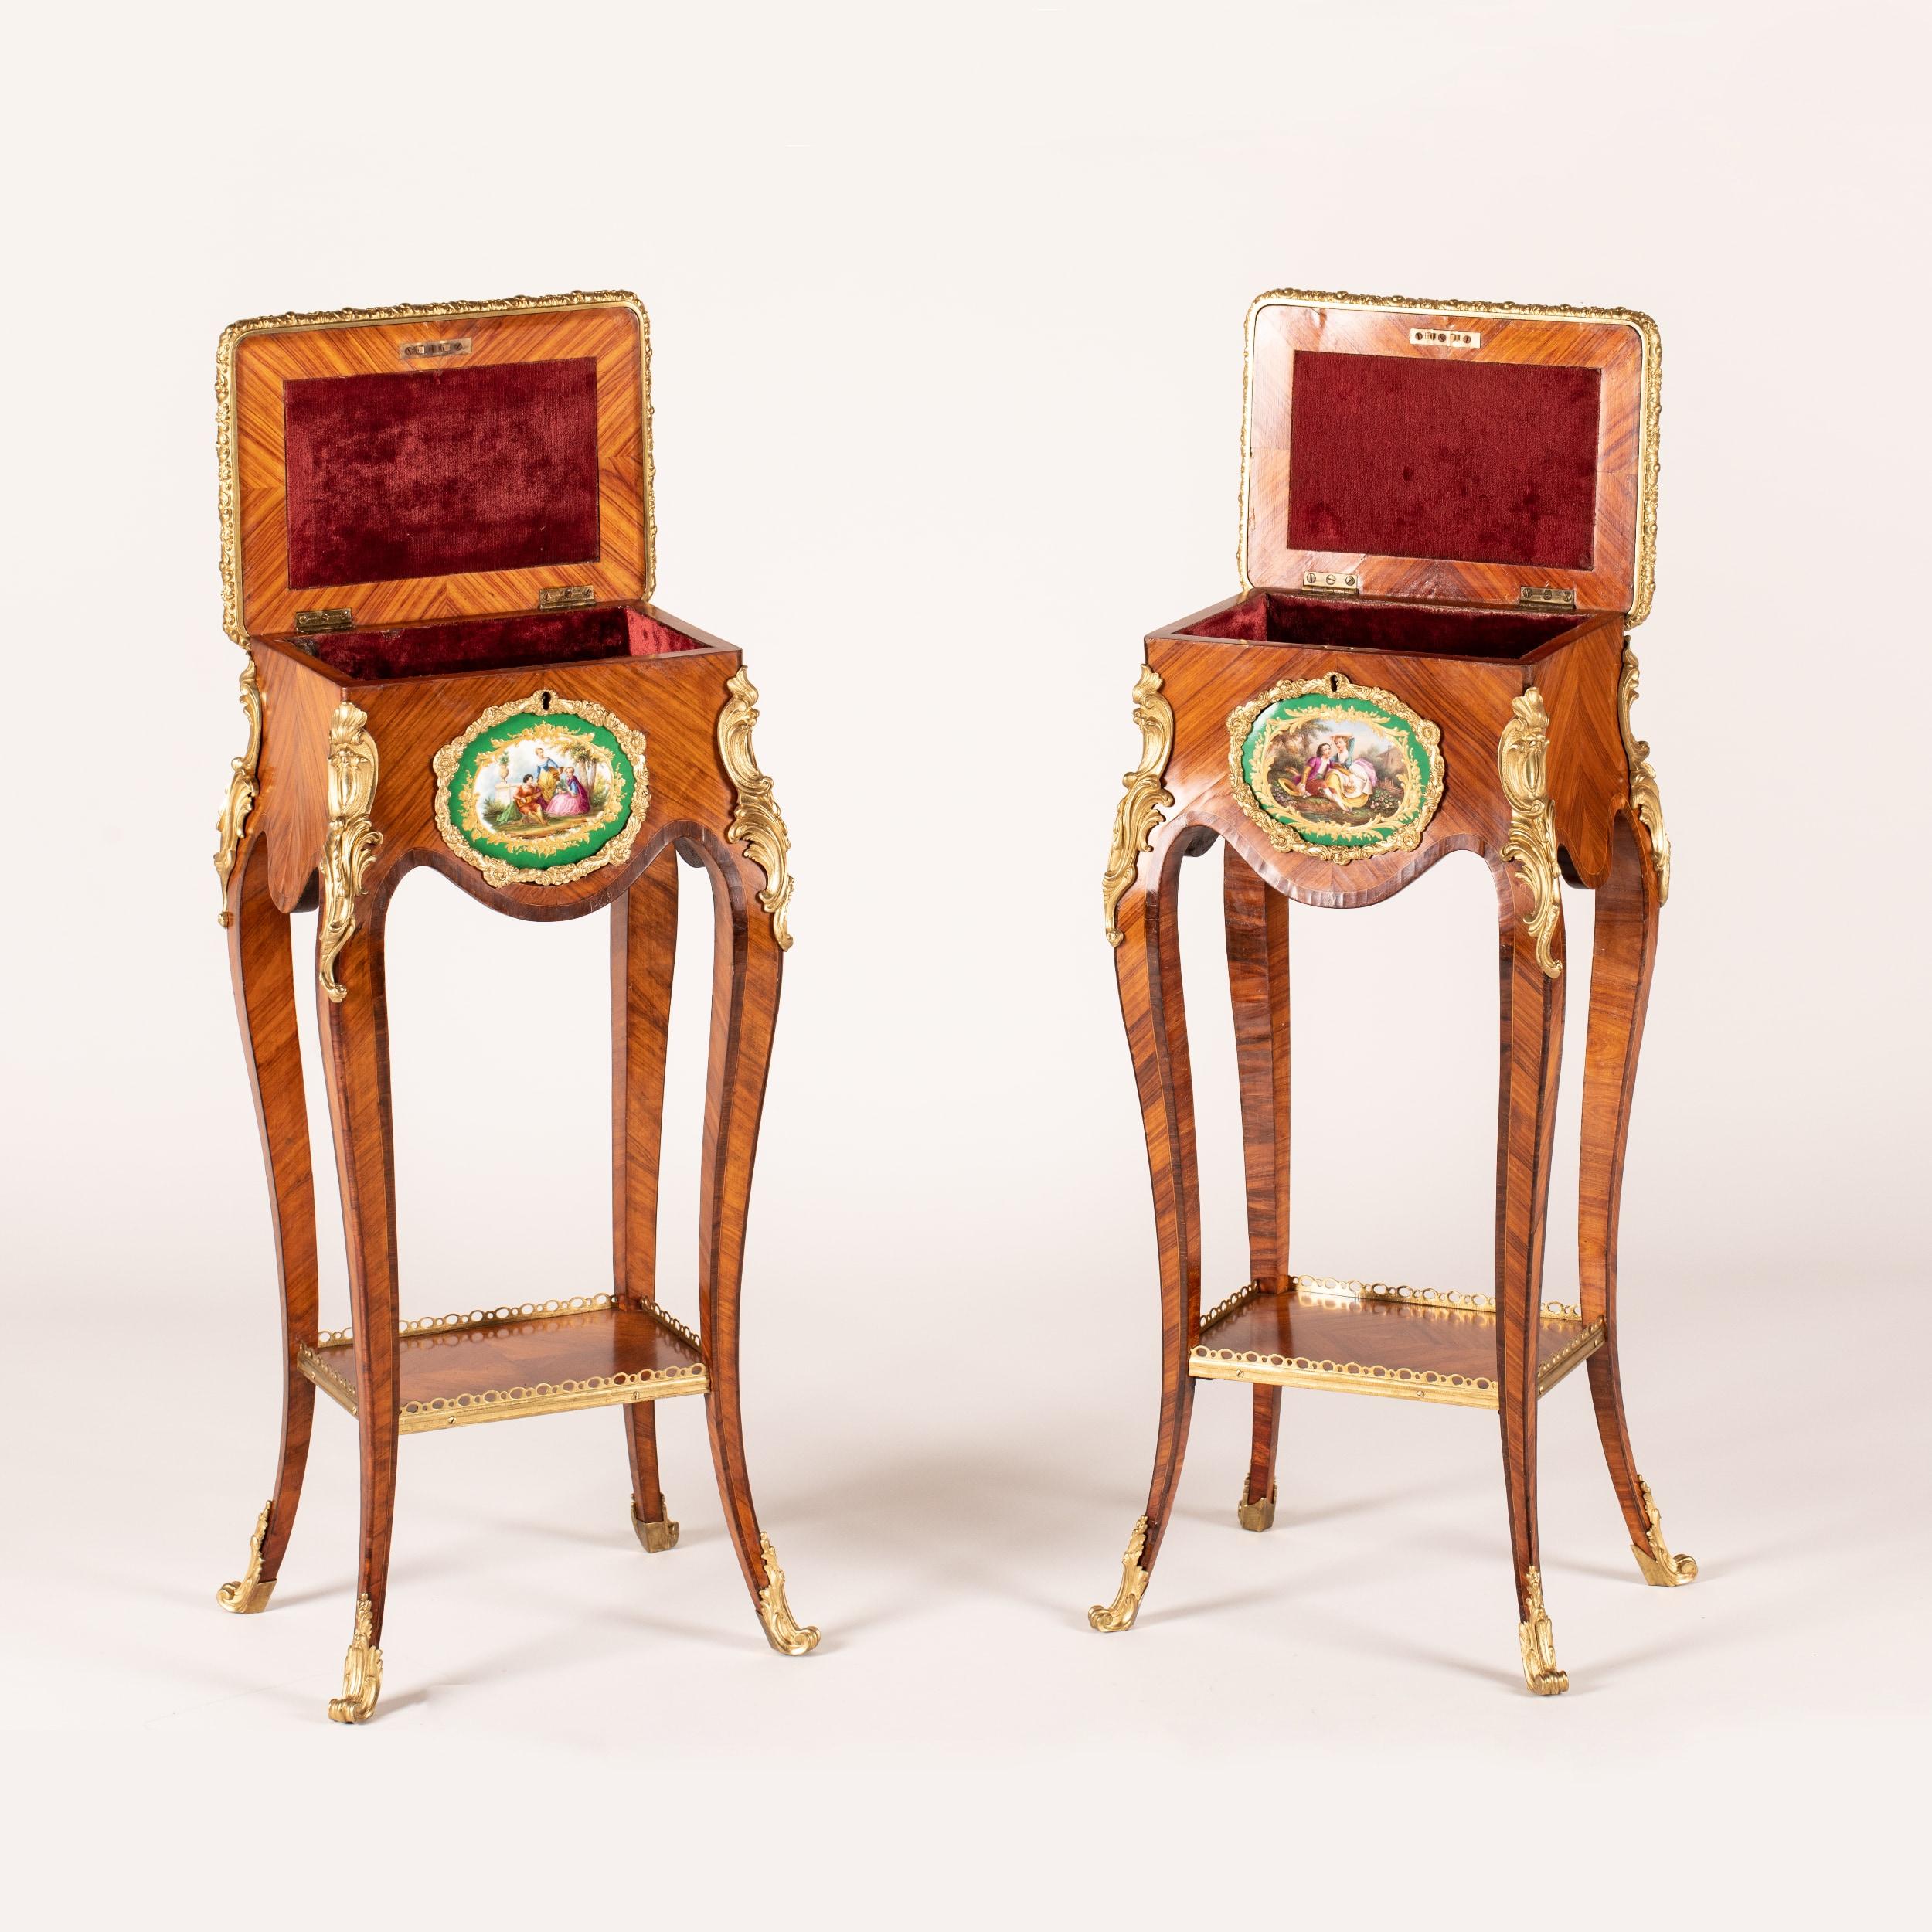 English 19th Century Pair of Occasional Tables in the Louis XV Transitional Taste For Sale